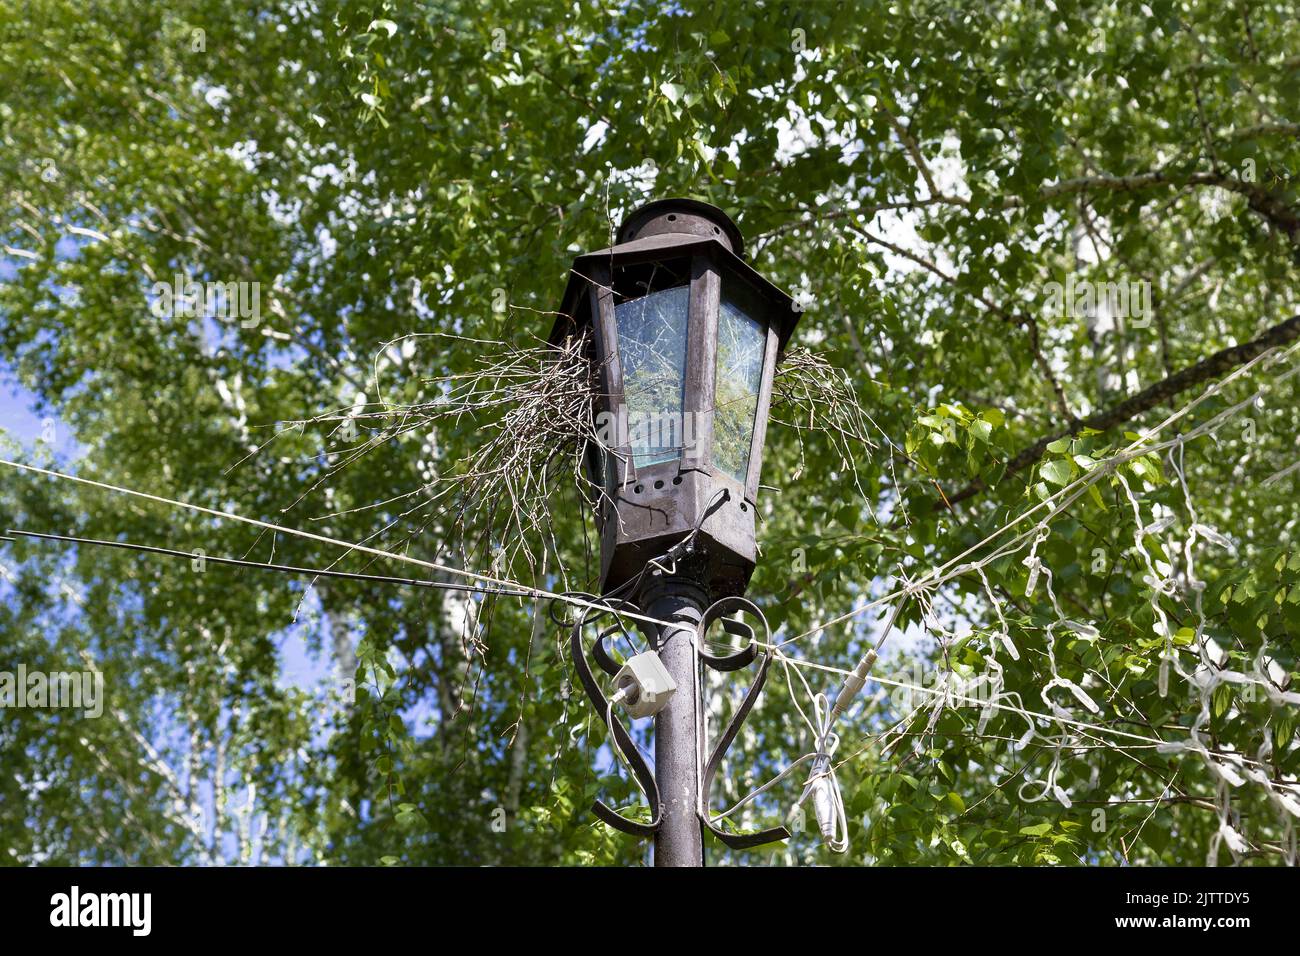 Bird nest in an old street lantern against the background of green trees. Stock Photo